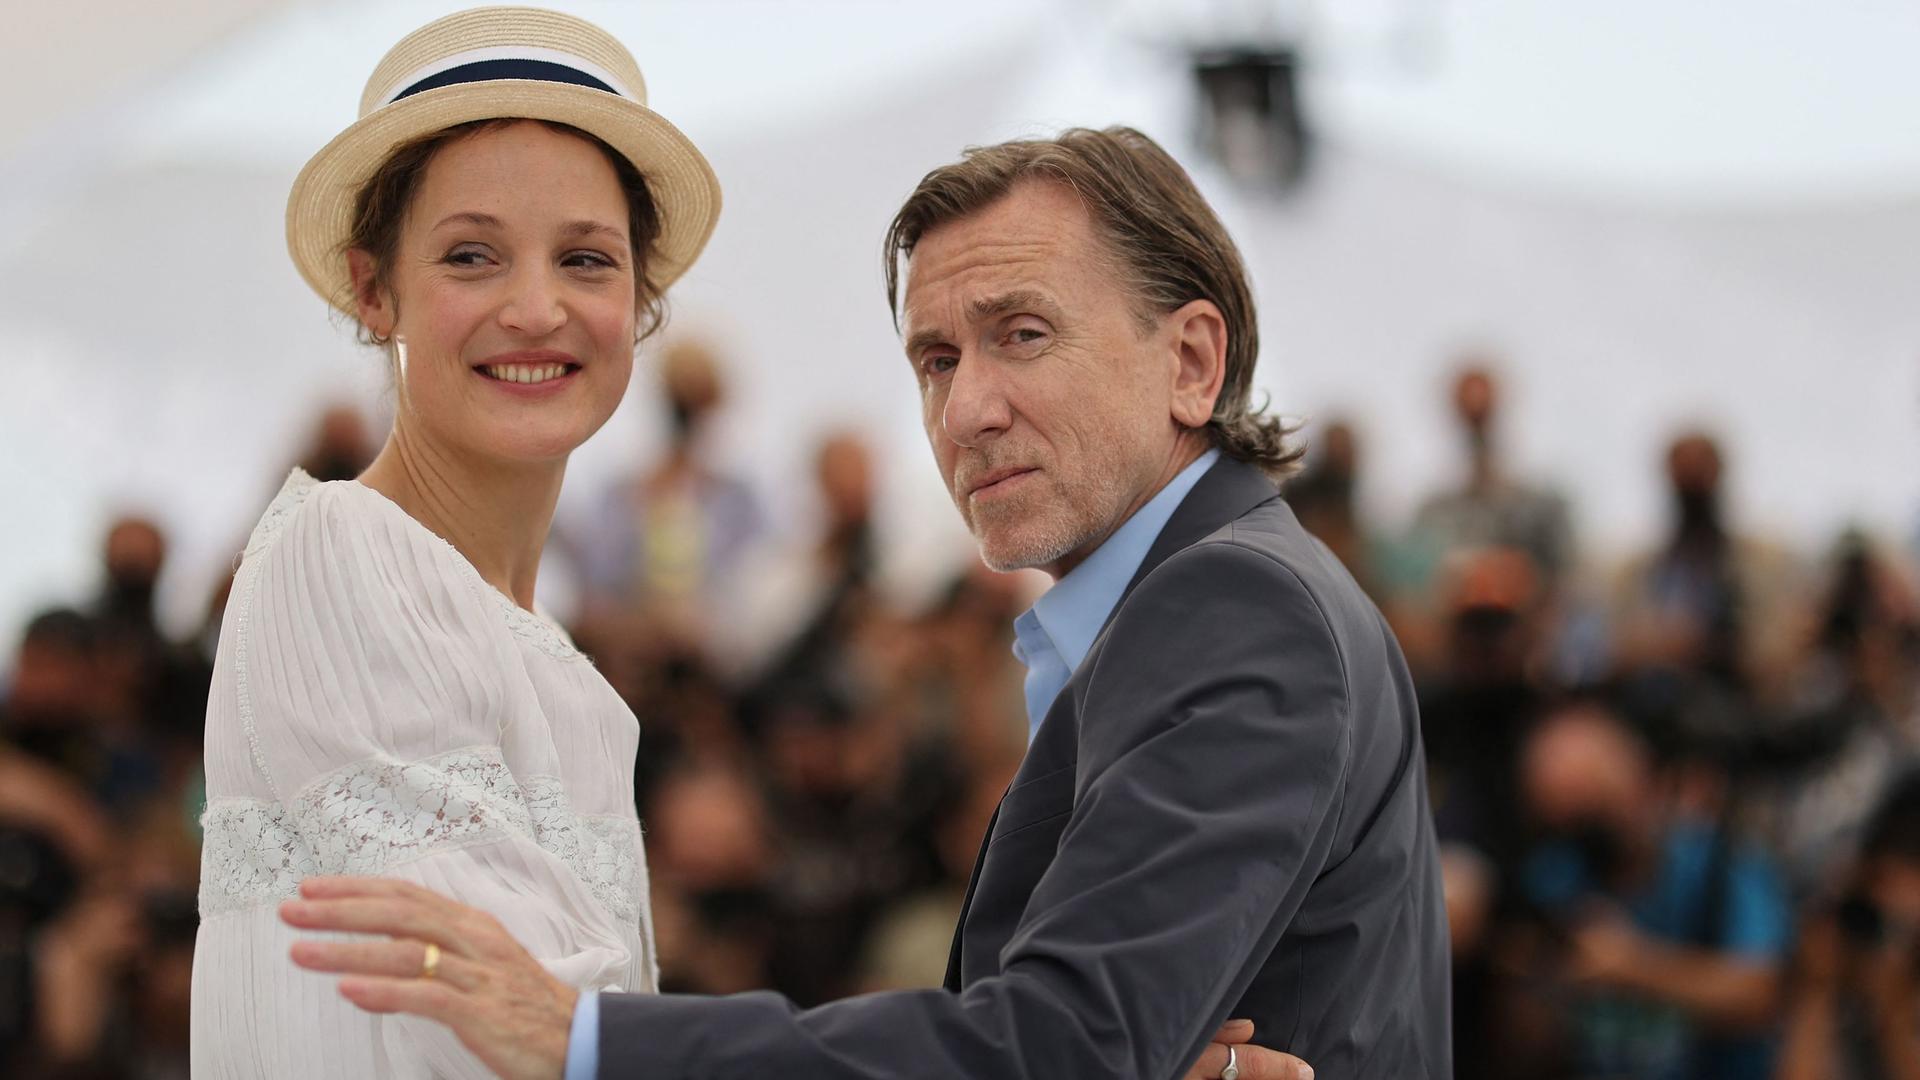 TOPSHOT - Luxembourg actress Vicky Krieps (L) and British actor Tim Roth pose during a photocall for the film "Bergman Island" at the 74th edition of the Cannes Film Festival in Cannes, southern France, on July 12, 2021. (Photo by Valery HACHE / AFP)